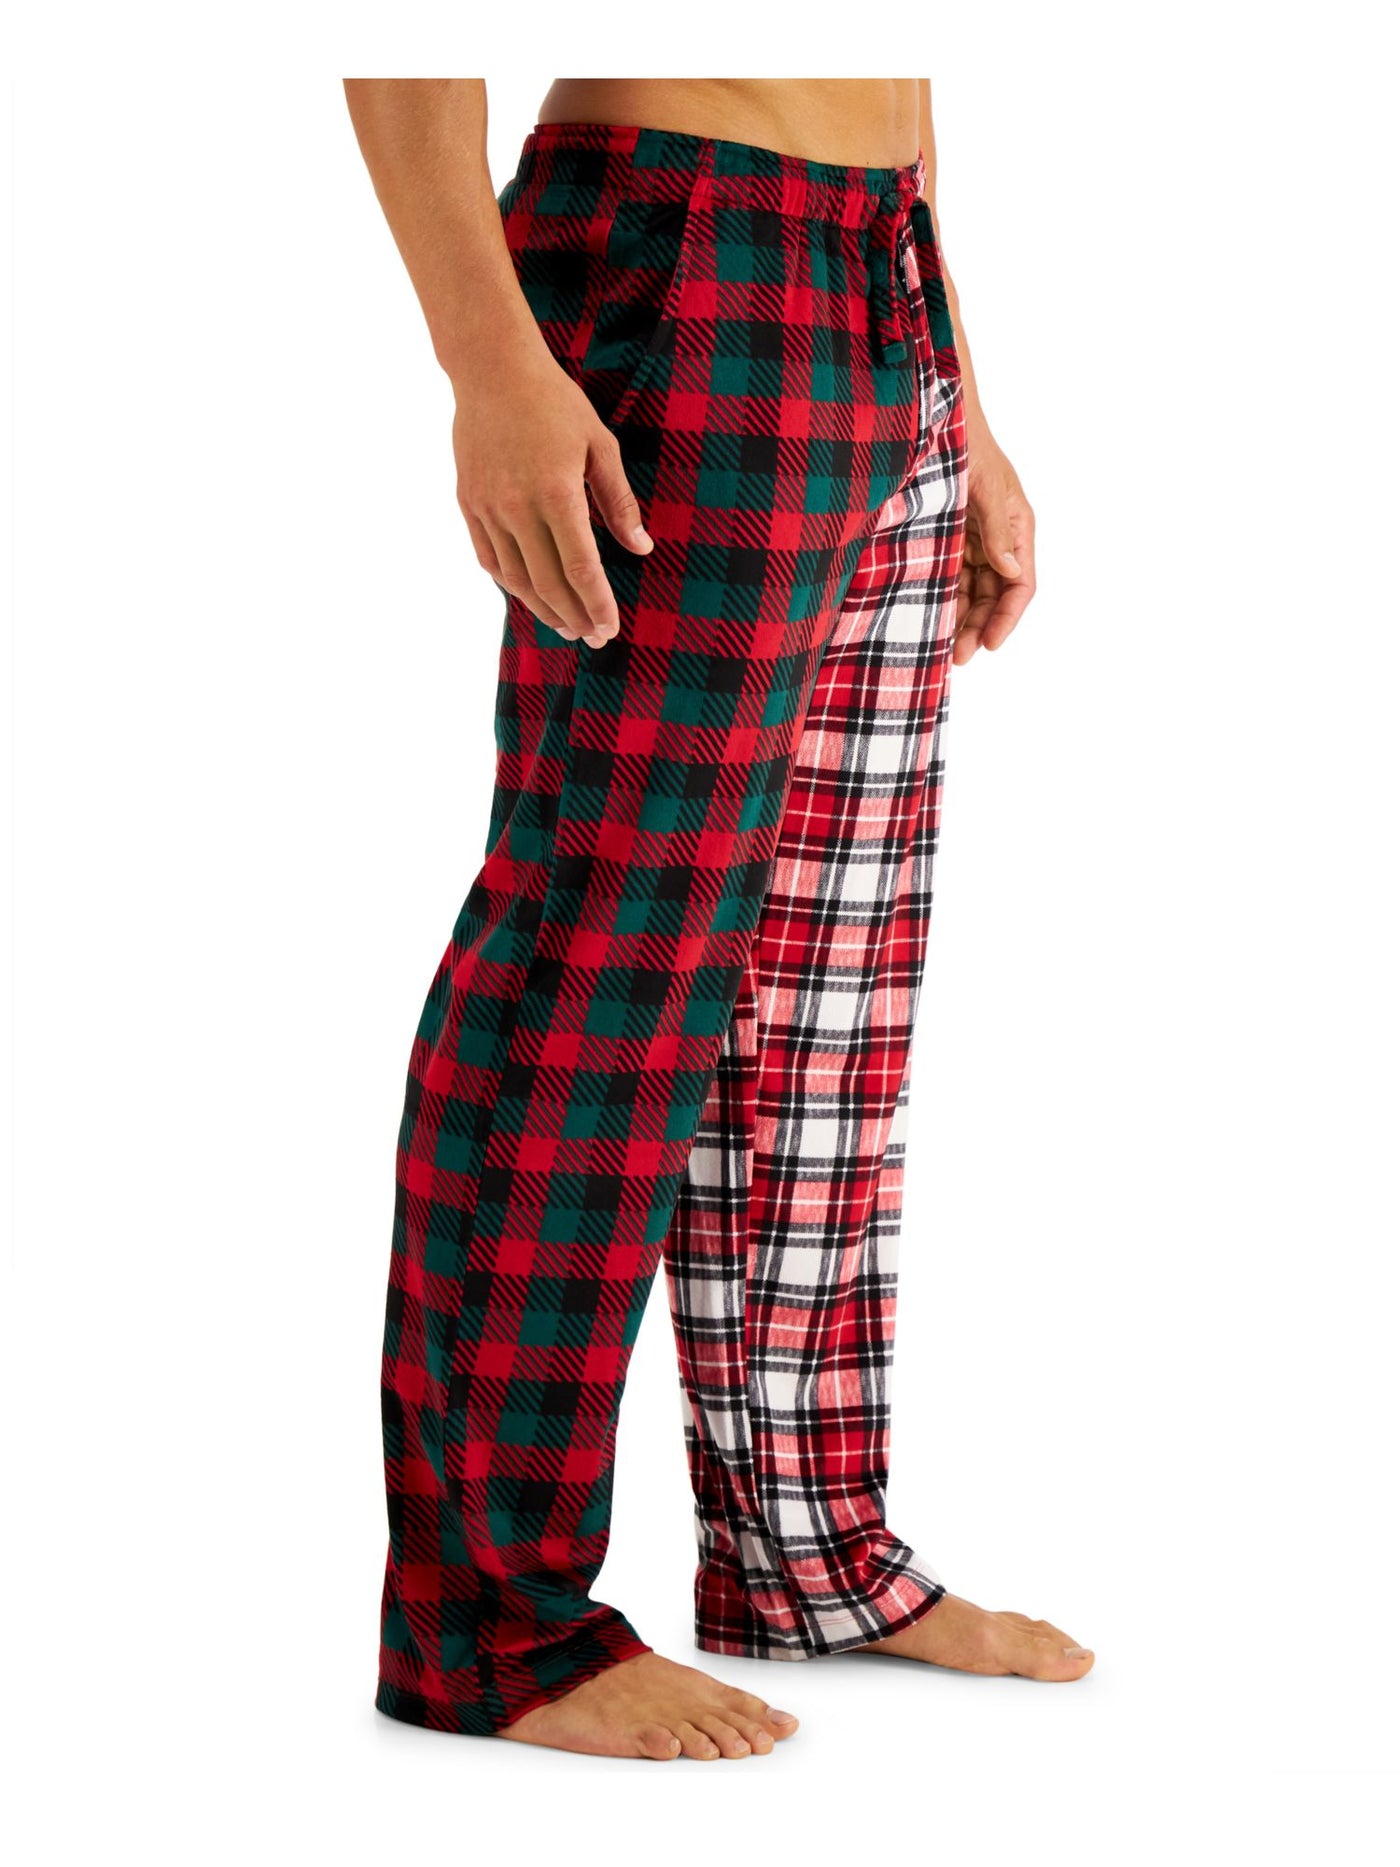 CLUBROOM Intimates Red Polyester Fleece Plaid Everyday Pants Size: XXL